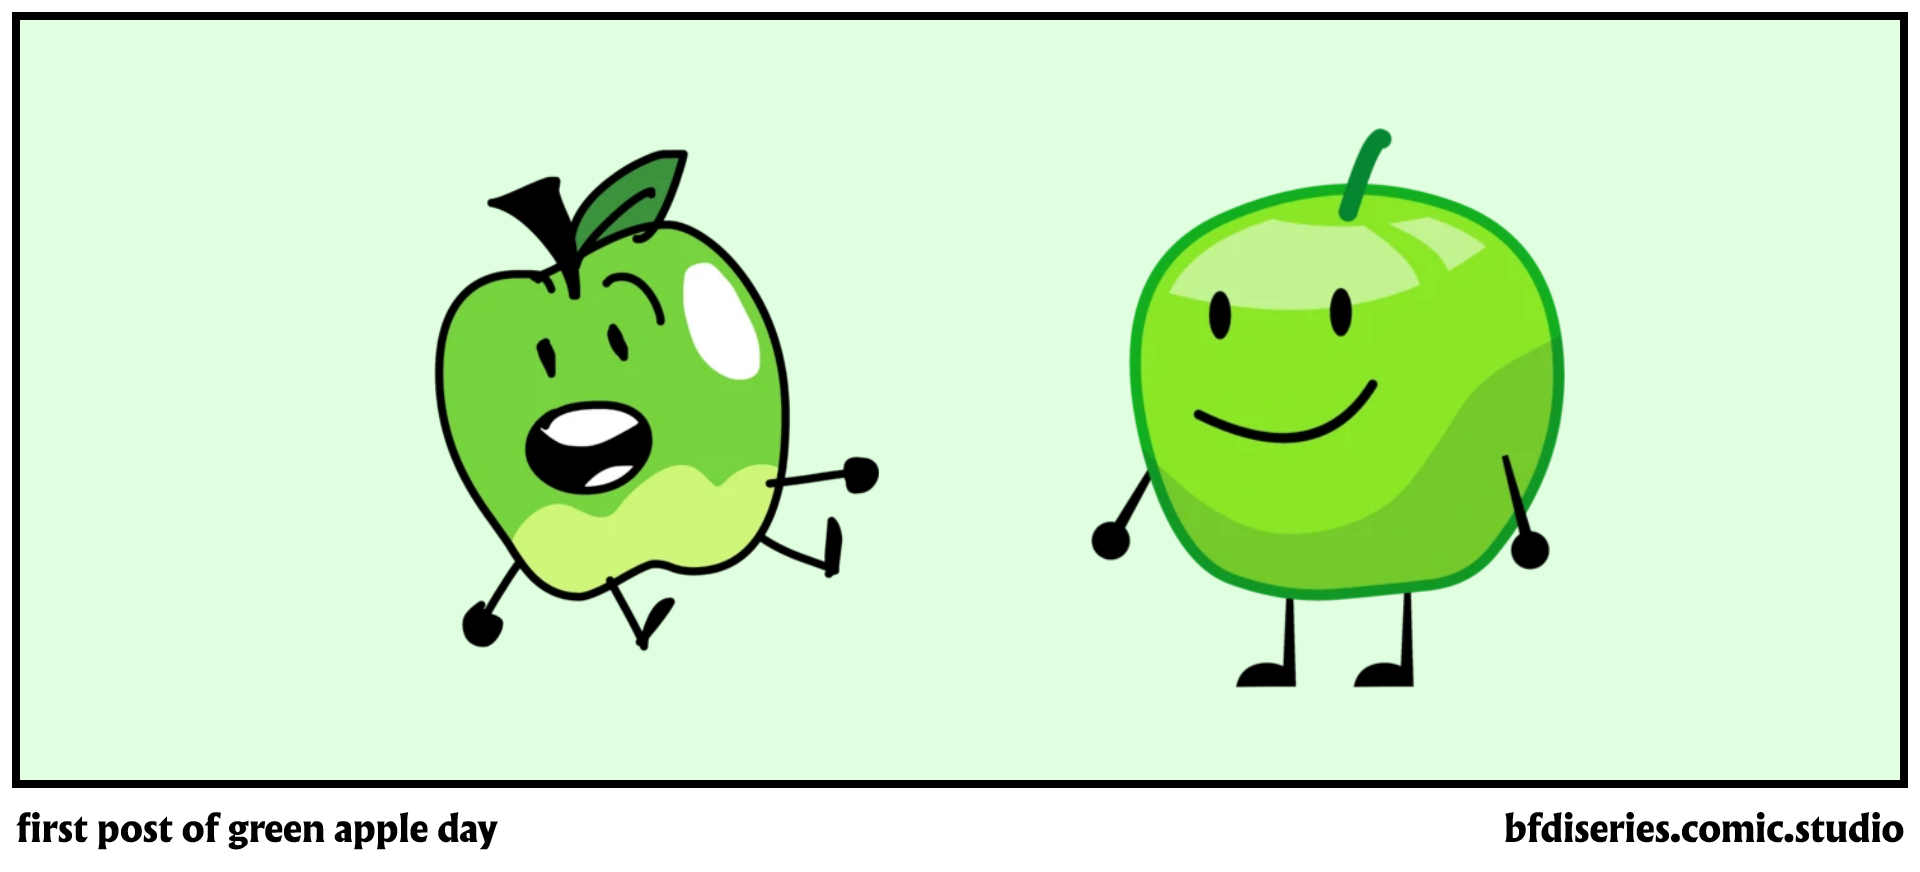 first post of green apple day